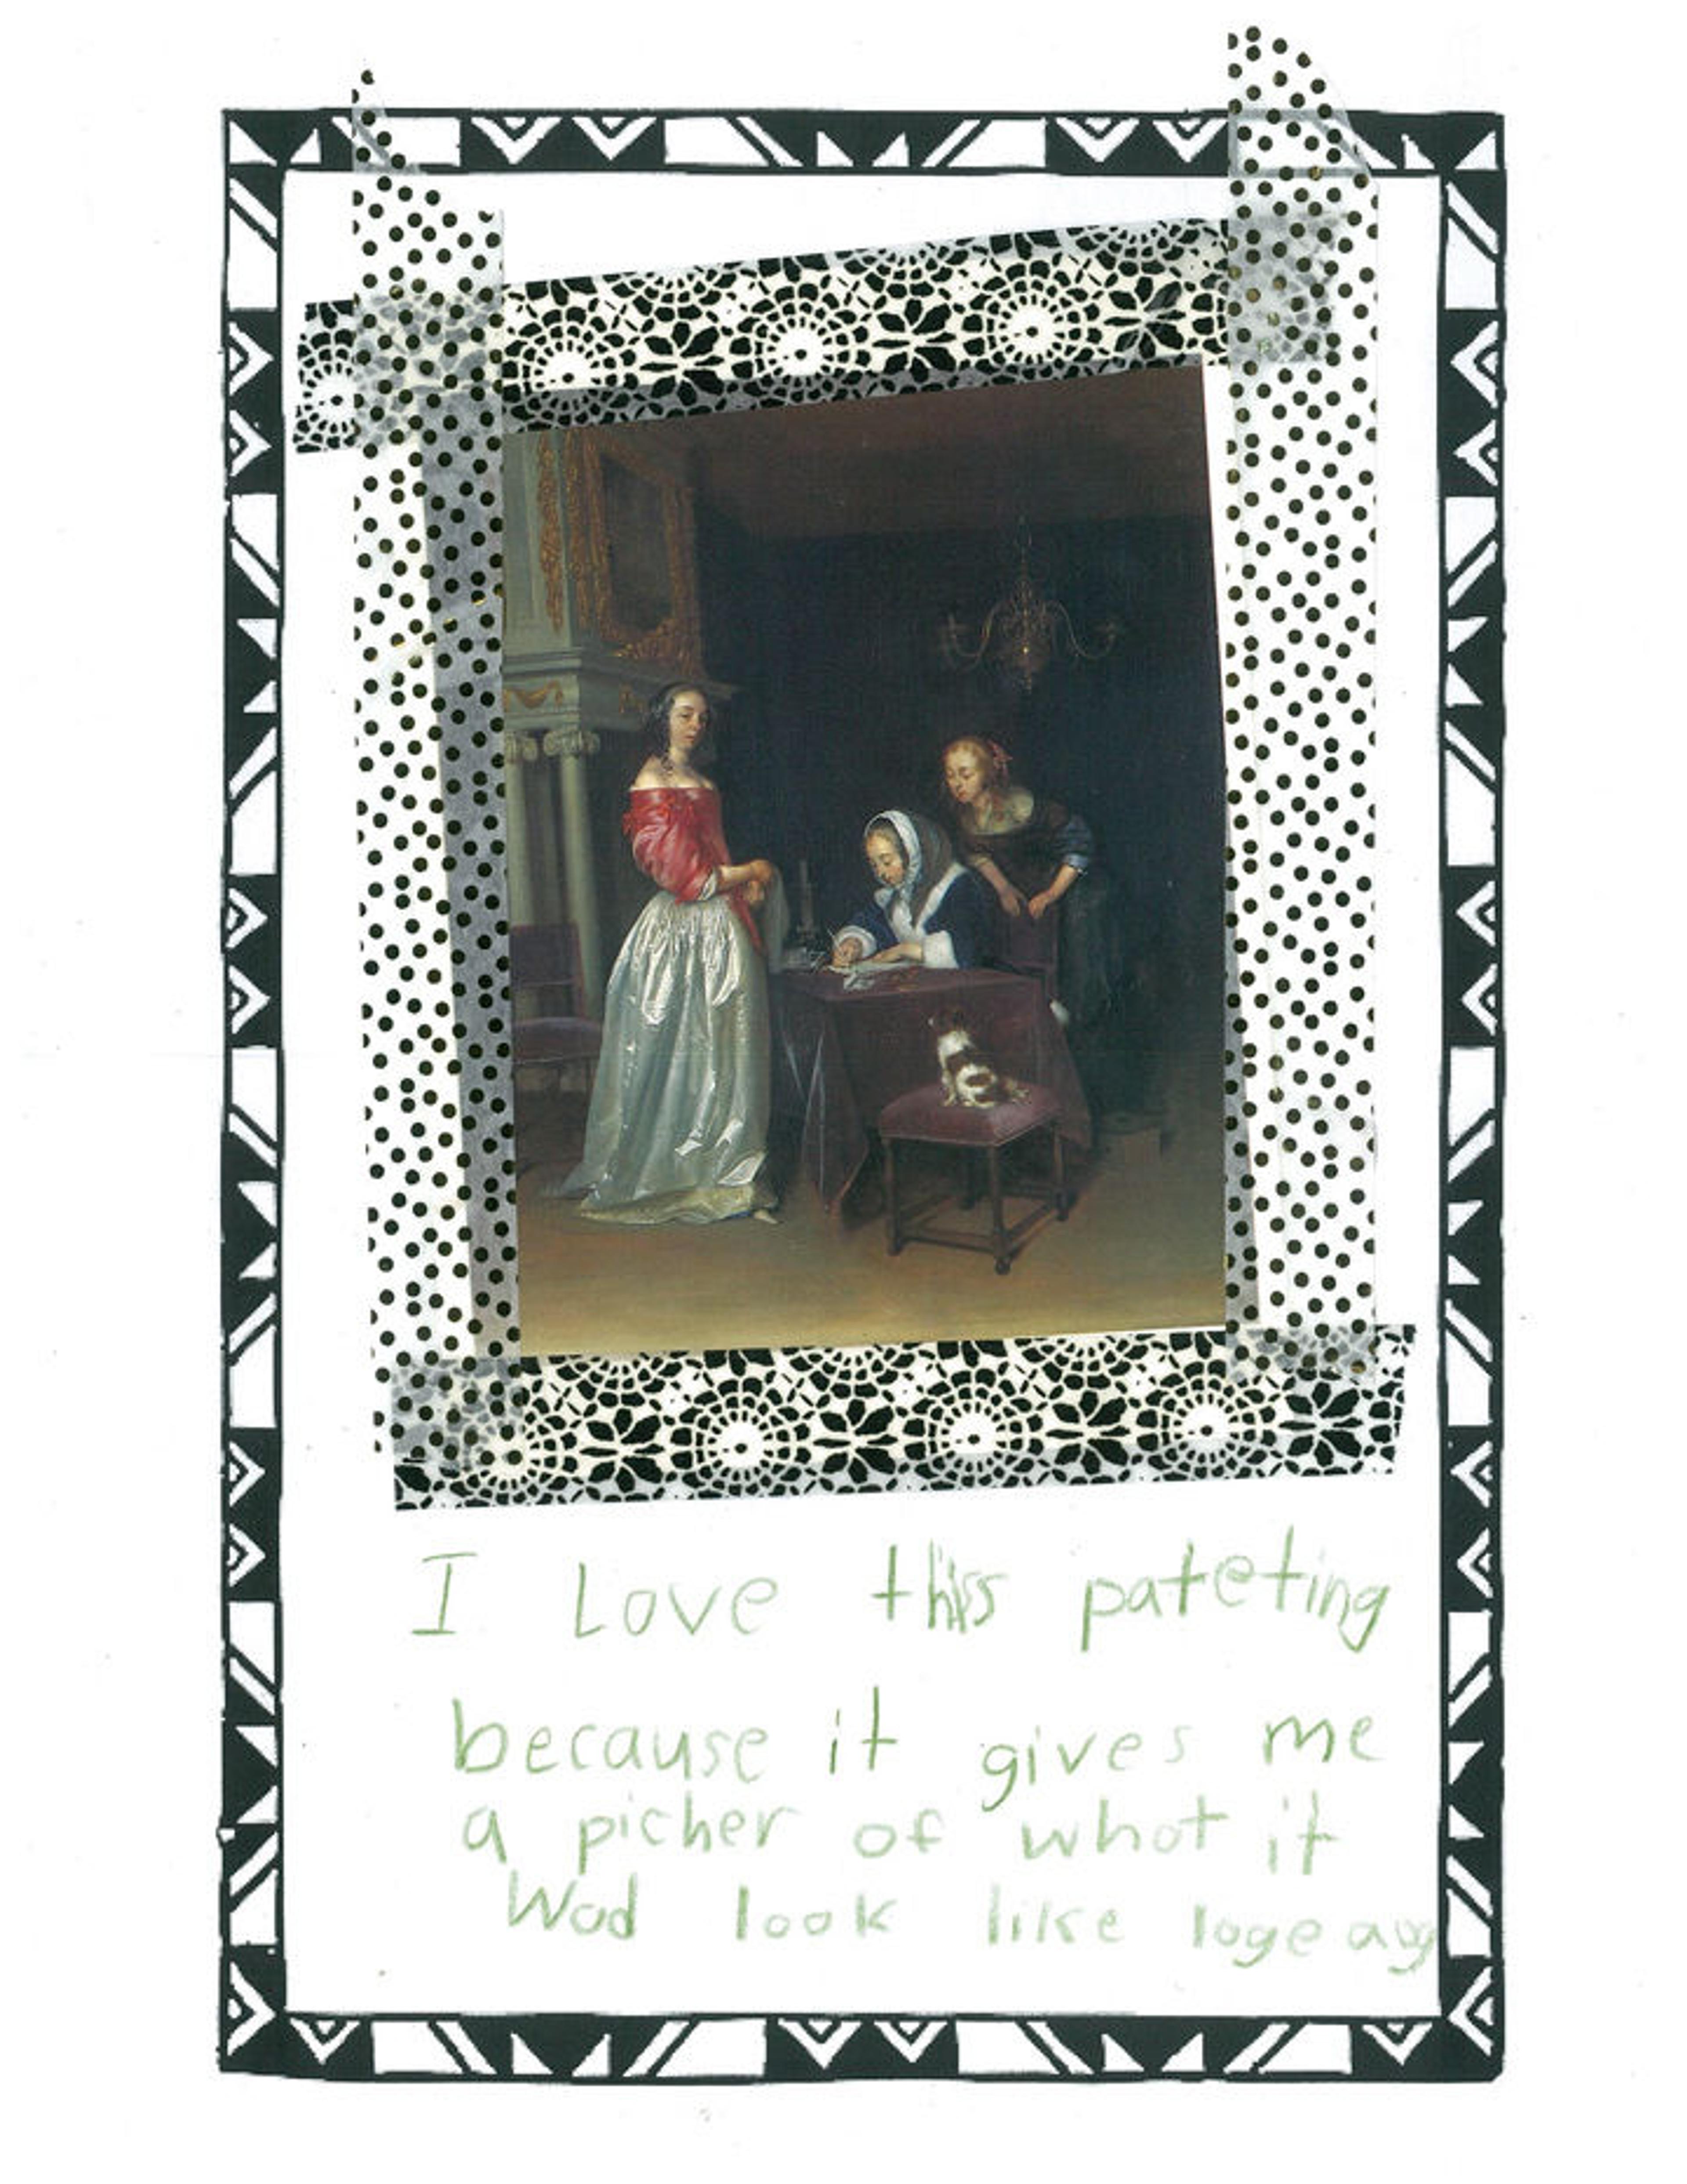 Picture of a kid's love letter to the painting "Curiosity" by Gerard ter Borch the Younger with a postcard of the painting. The painting shows three women indoors. One is writing at a desk while the others watch her.